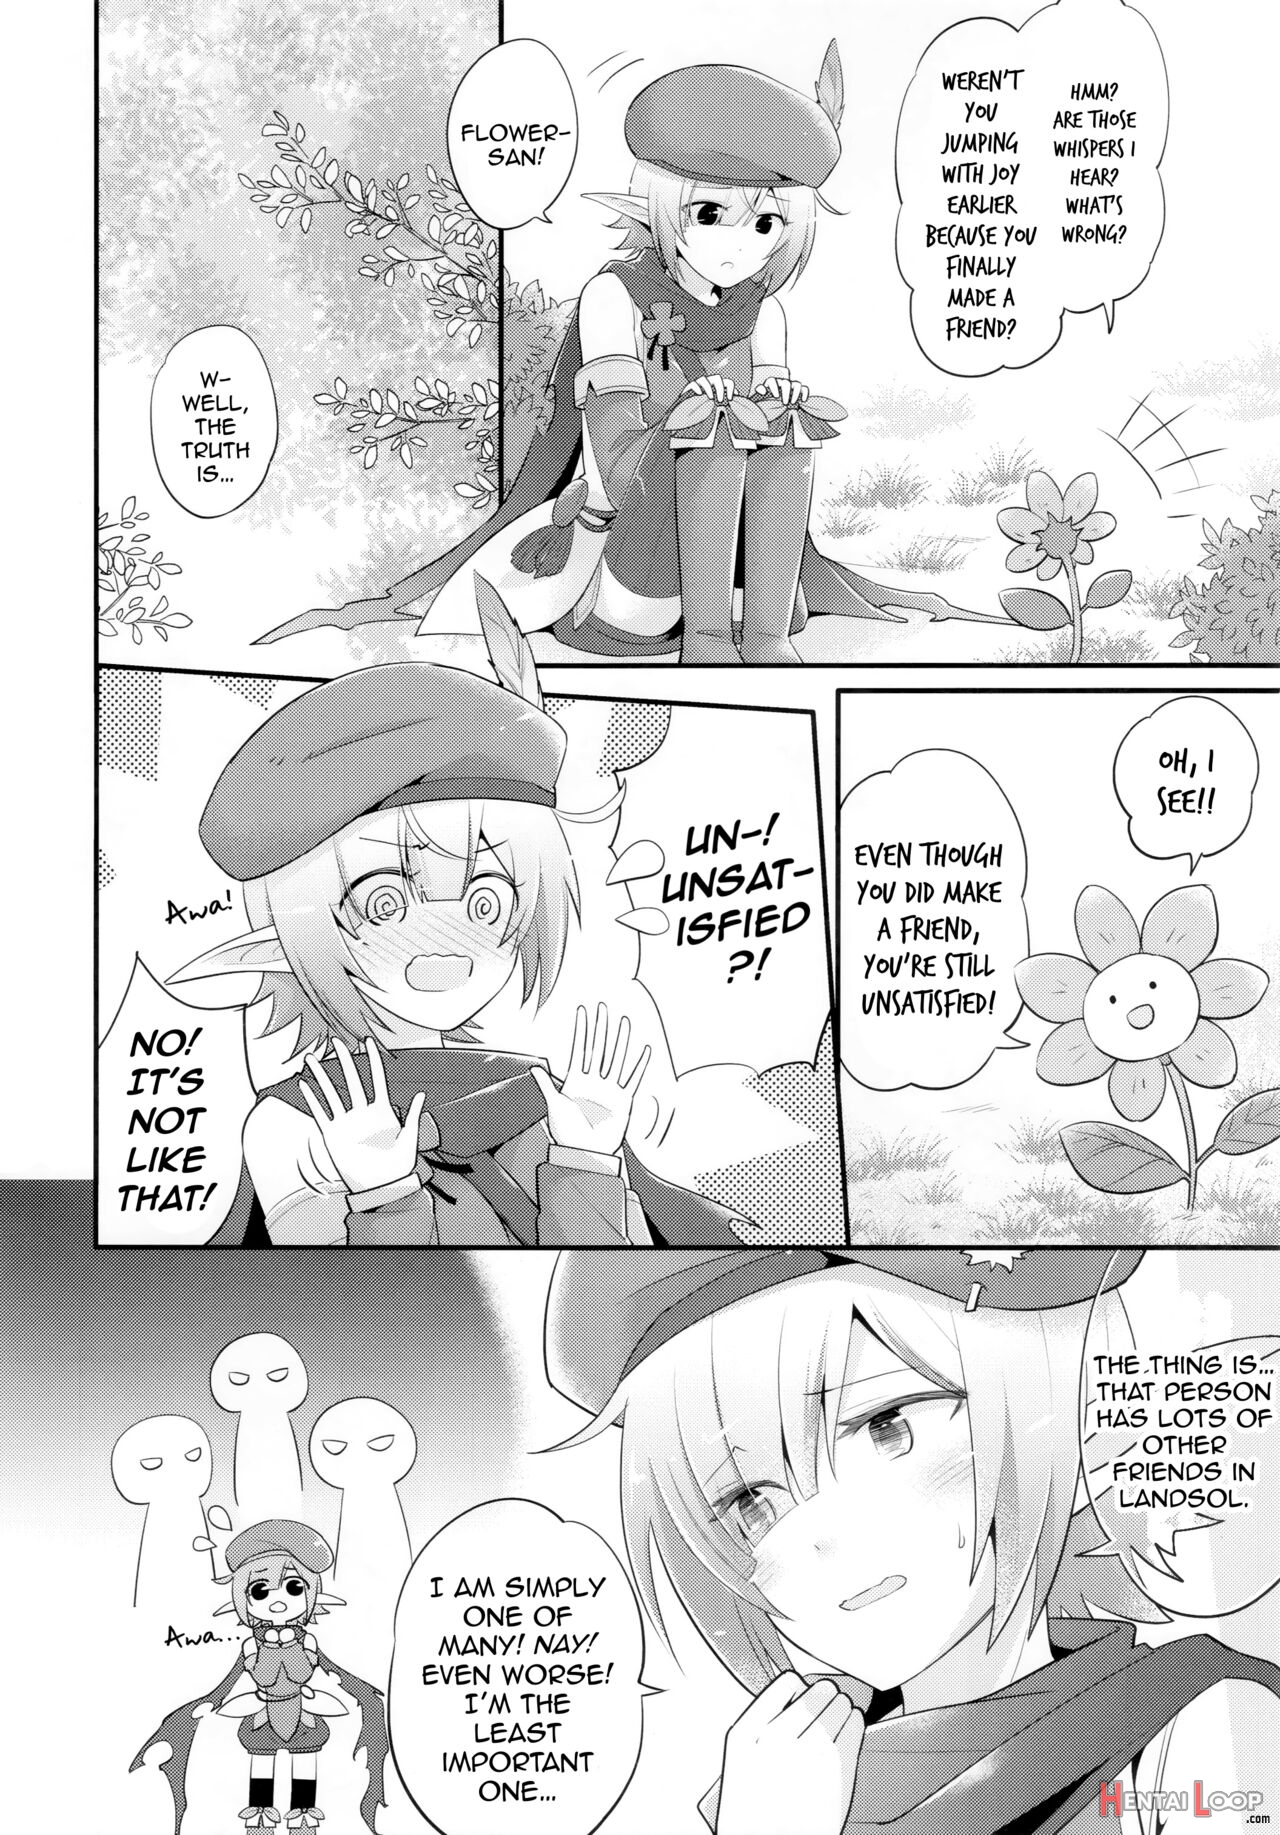 Aoi's All-out Friend Making Strategy page 5